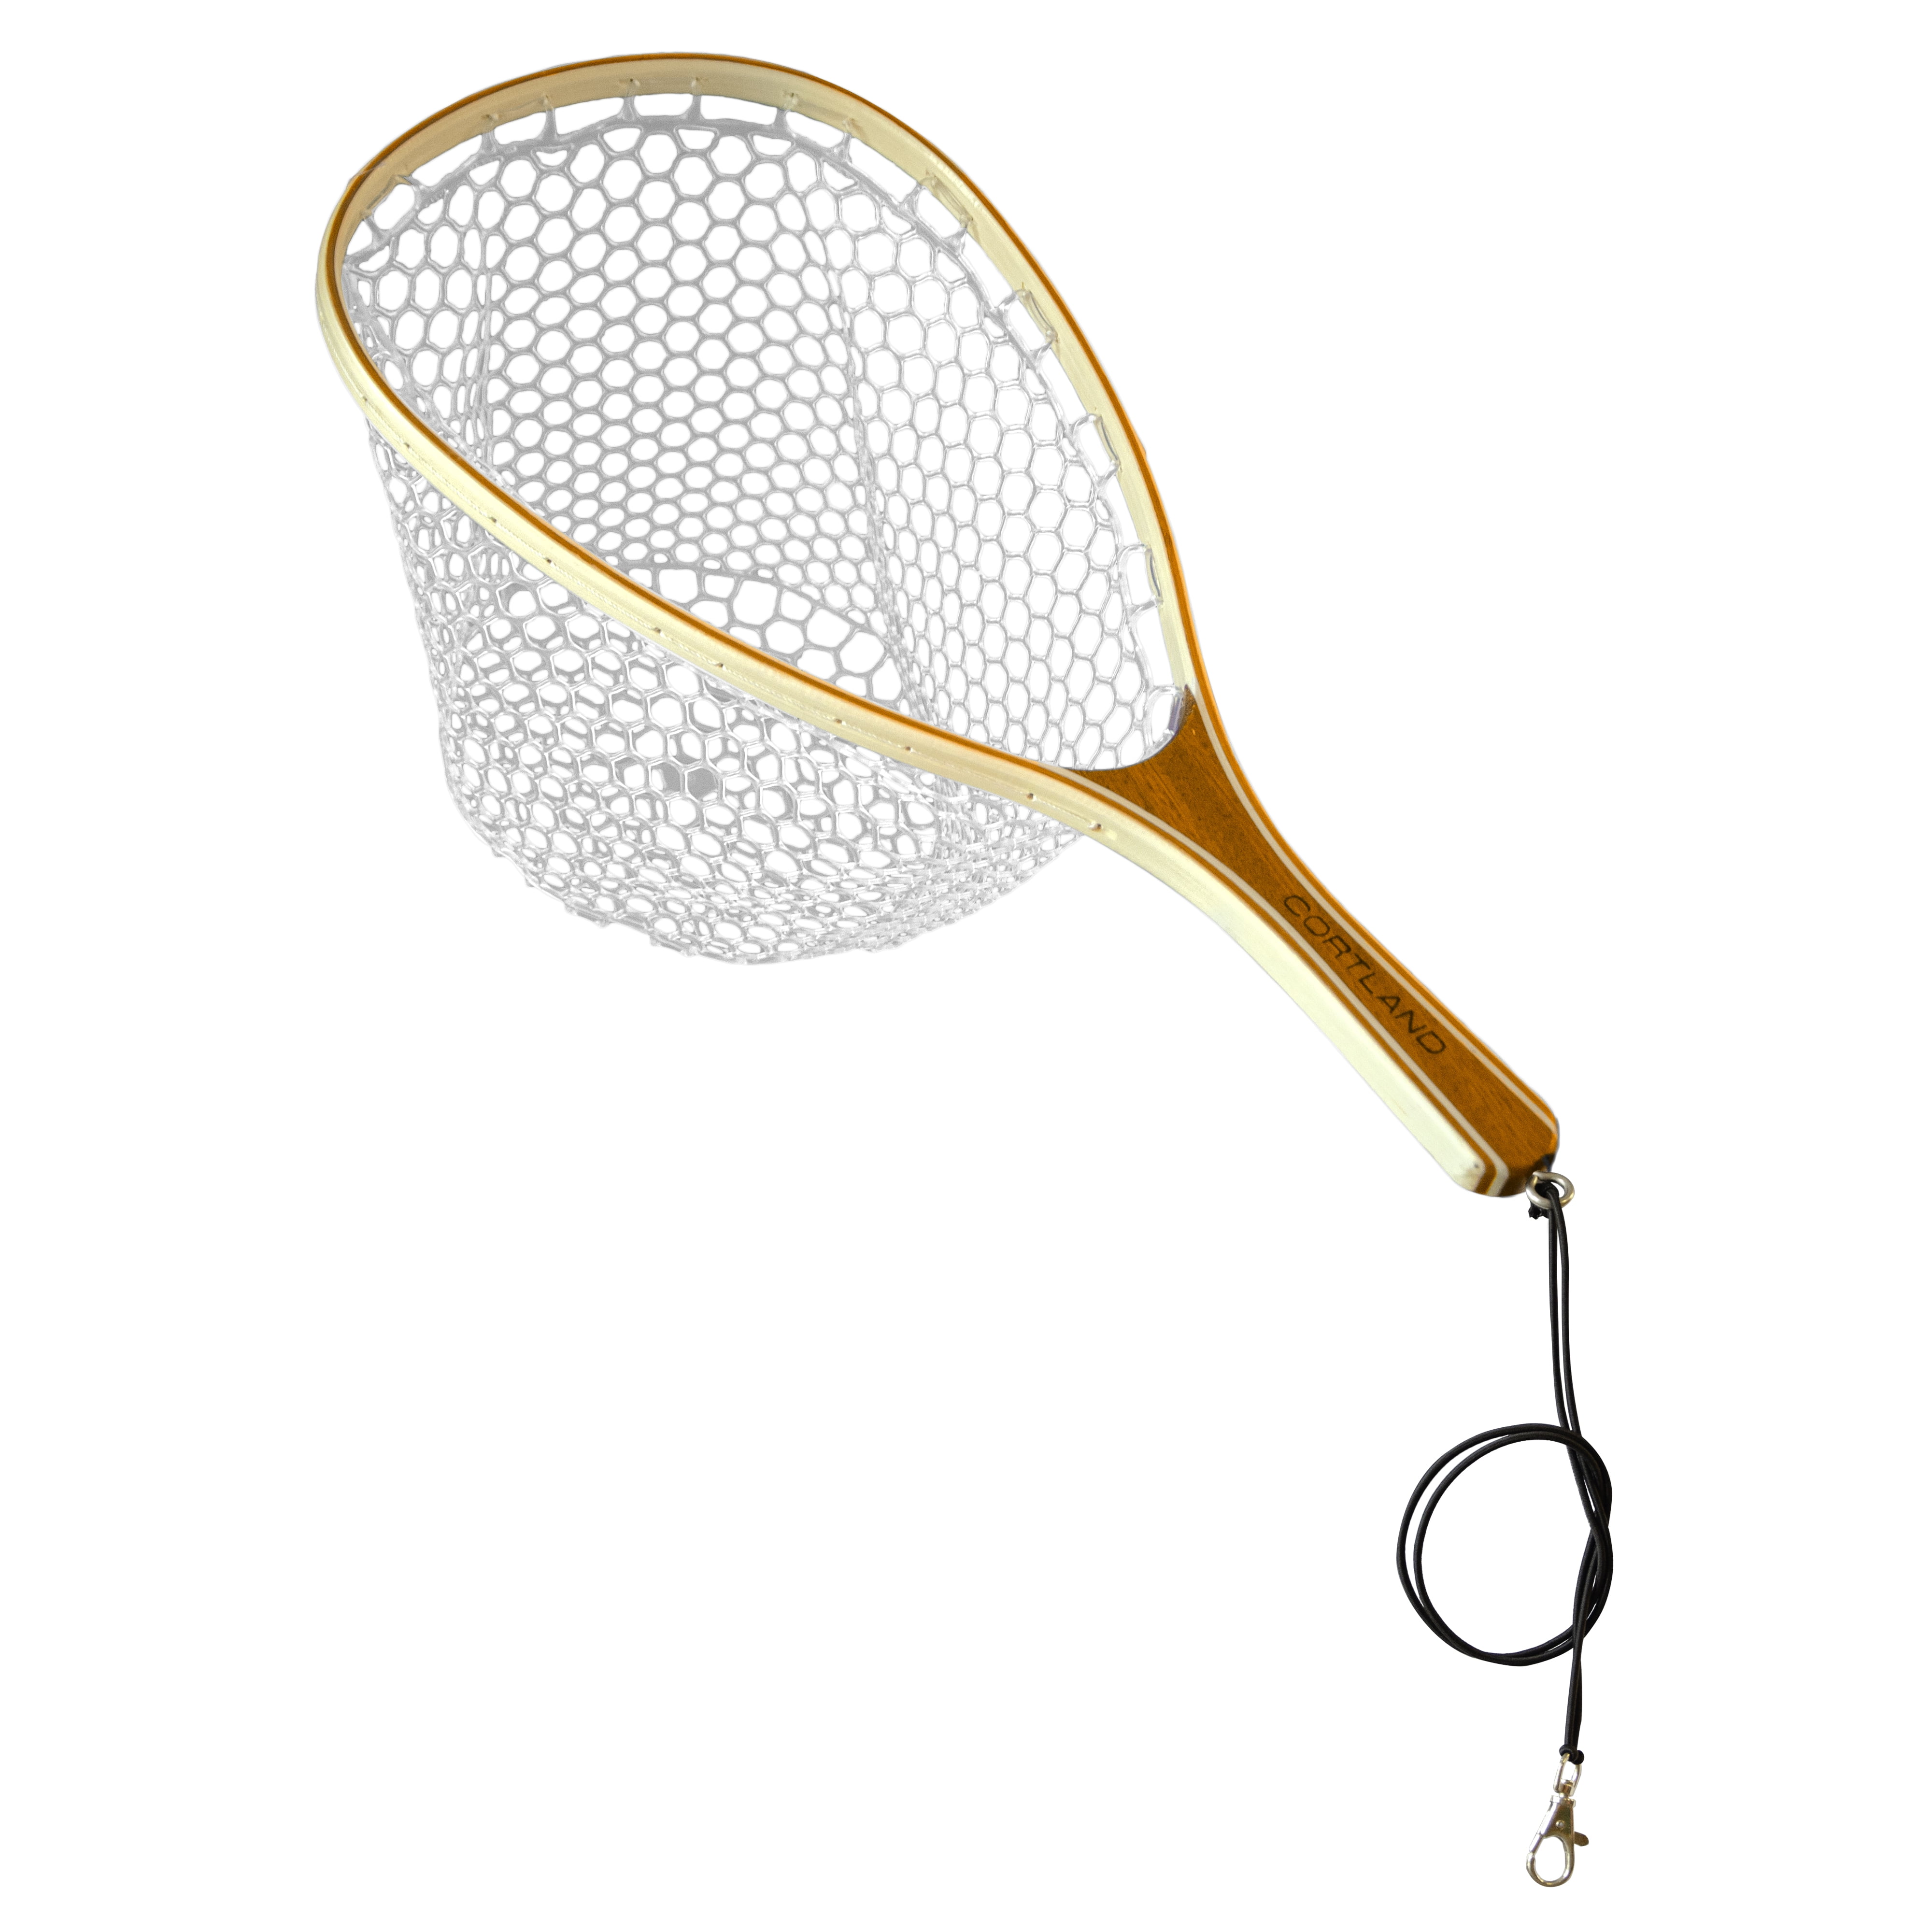 Cortland Fairplay Fly Catch & Release Aluminum Trout Fishing Net T-19